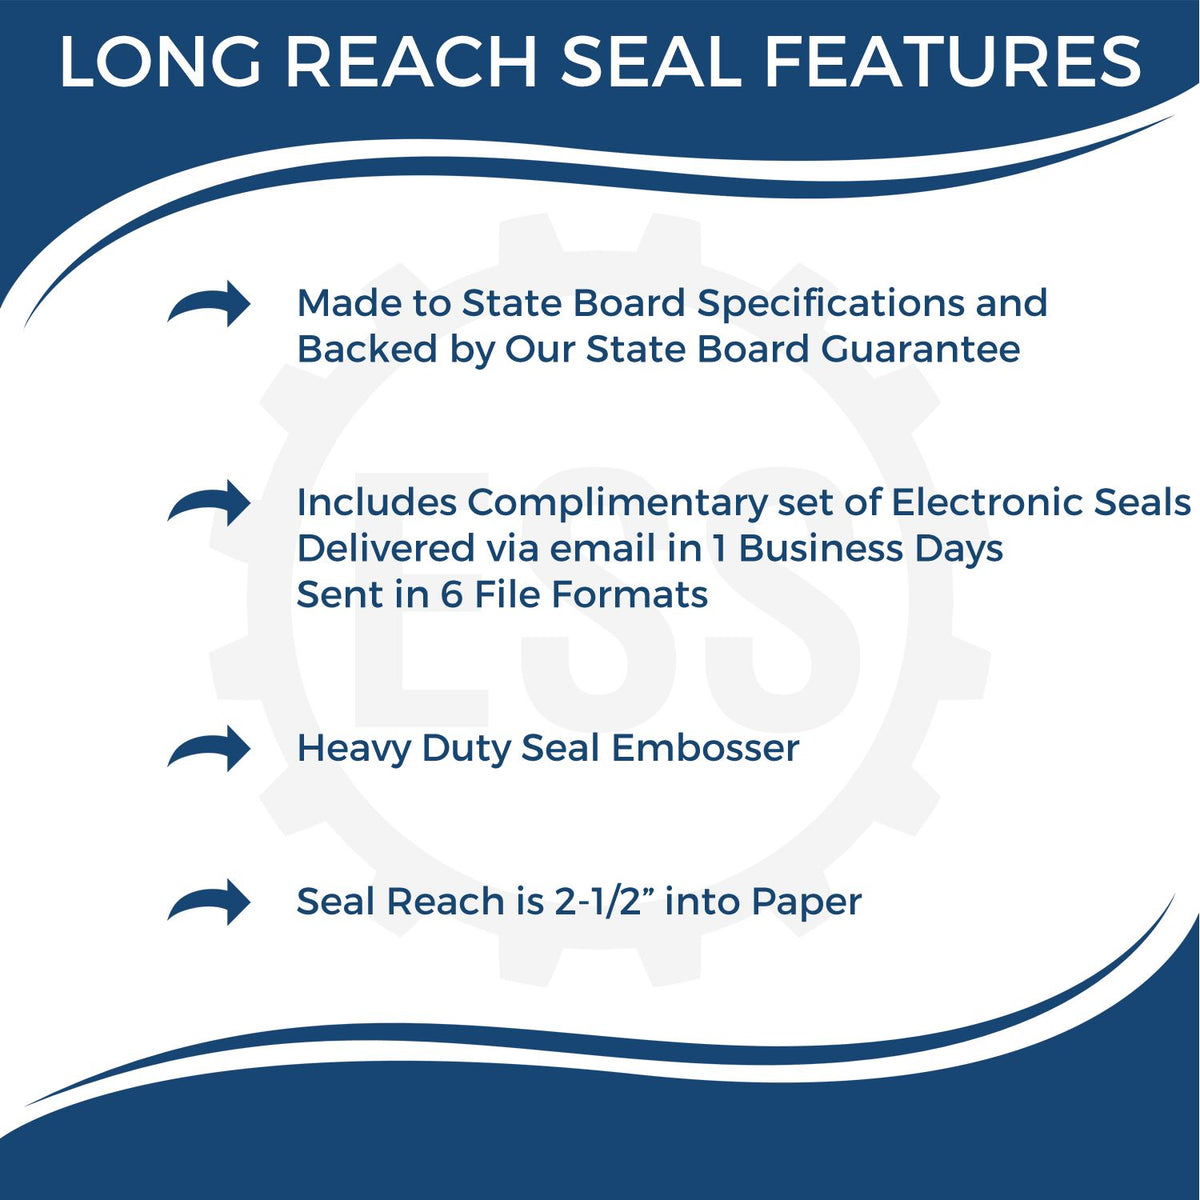 A picture of an infographic highlighting the selling points for the Long Reach Vermont Geology Seal